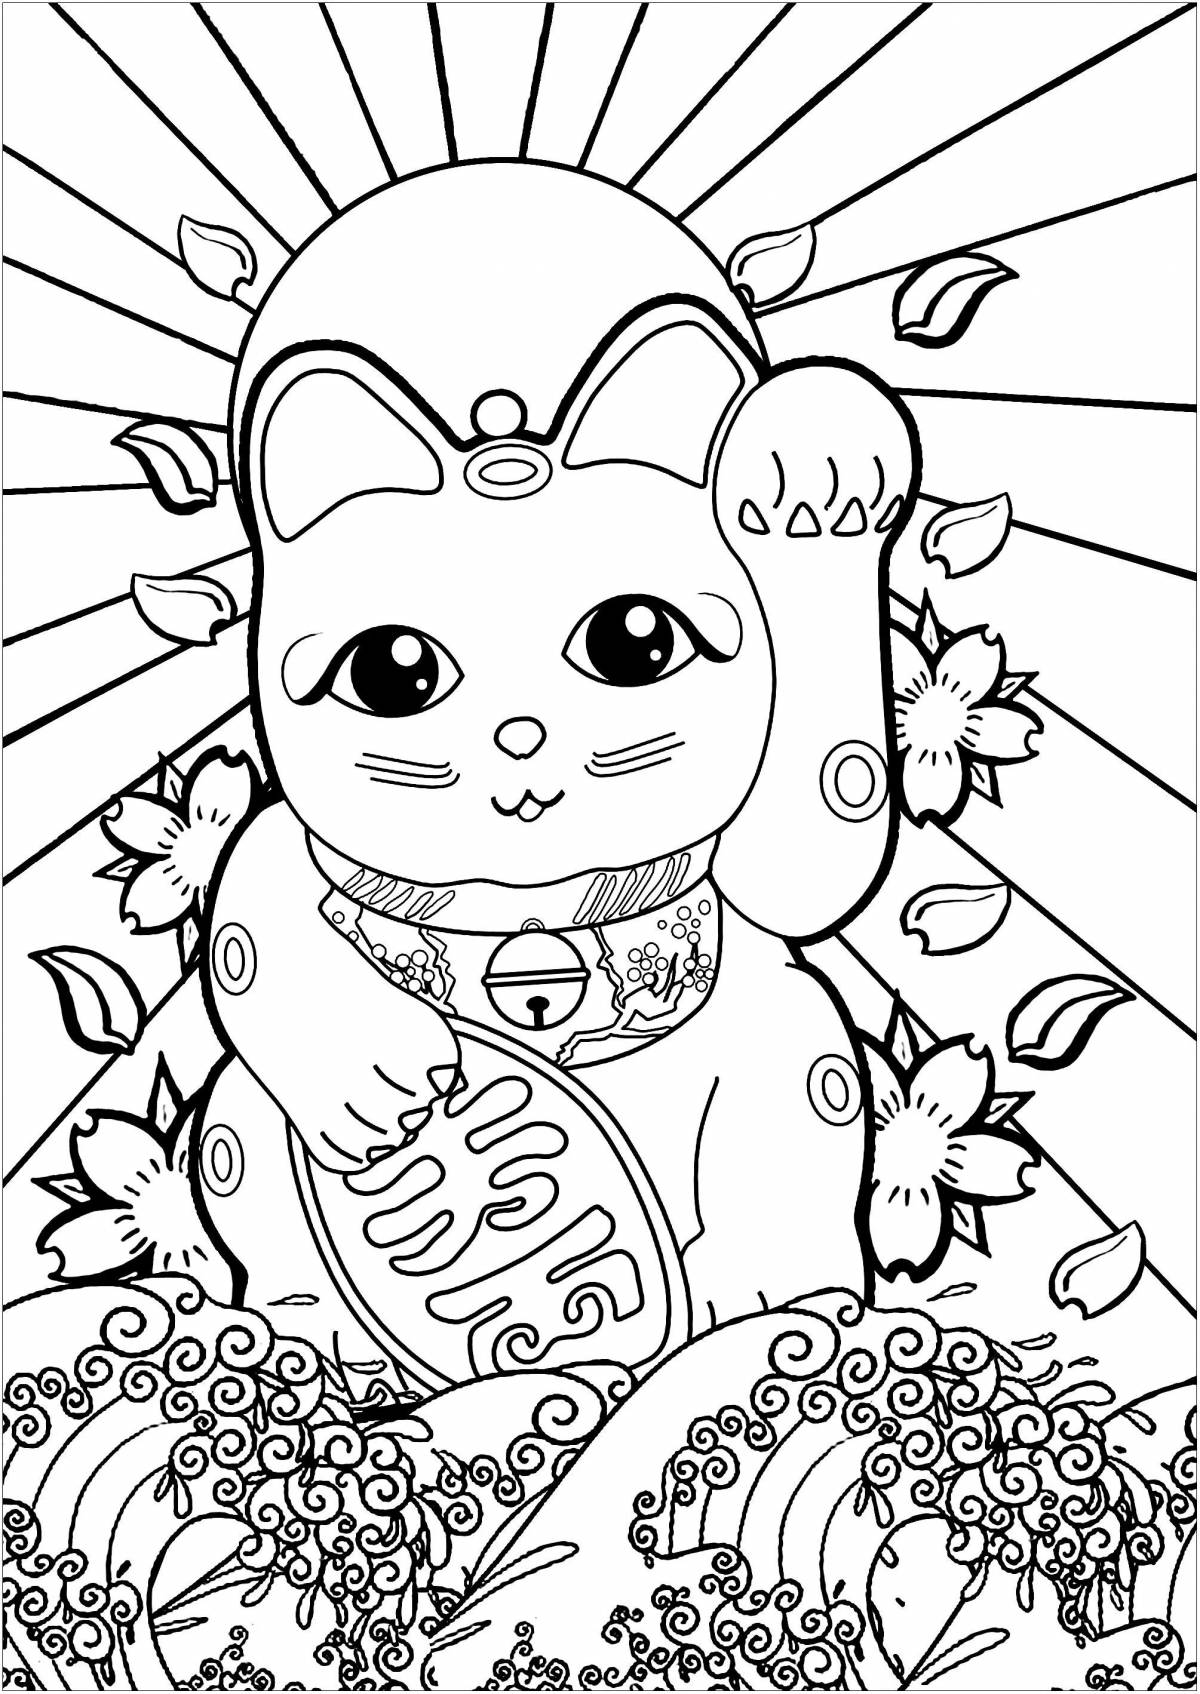 Coloring book shining chinese cat